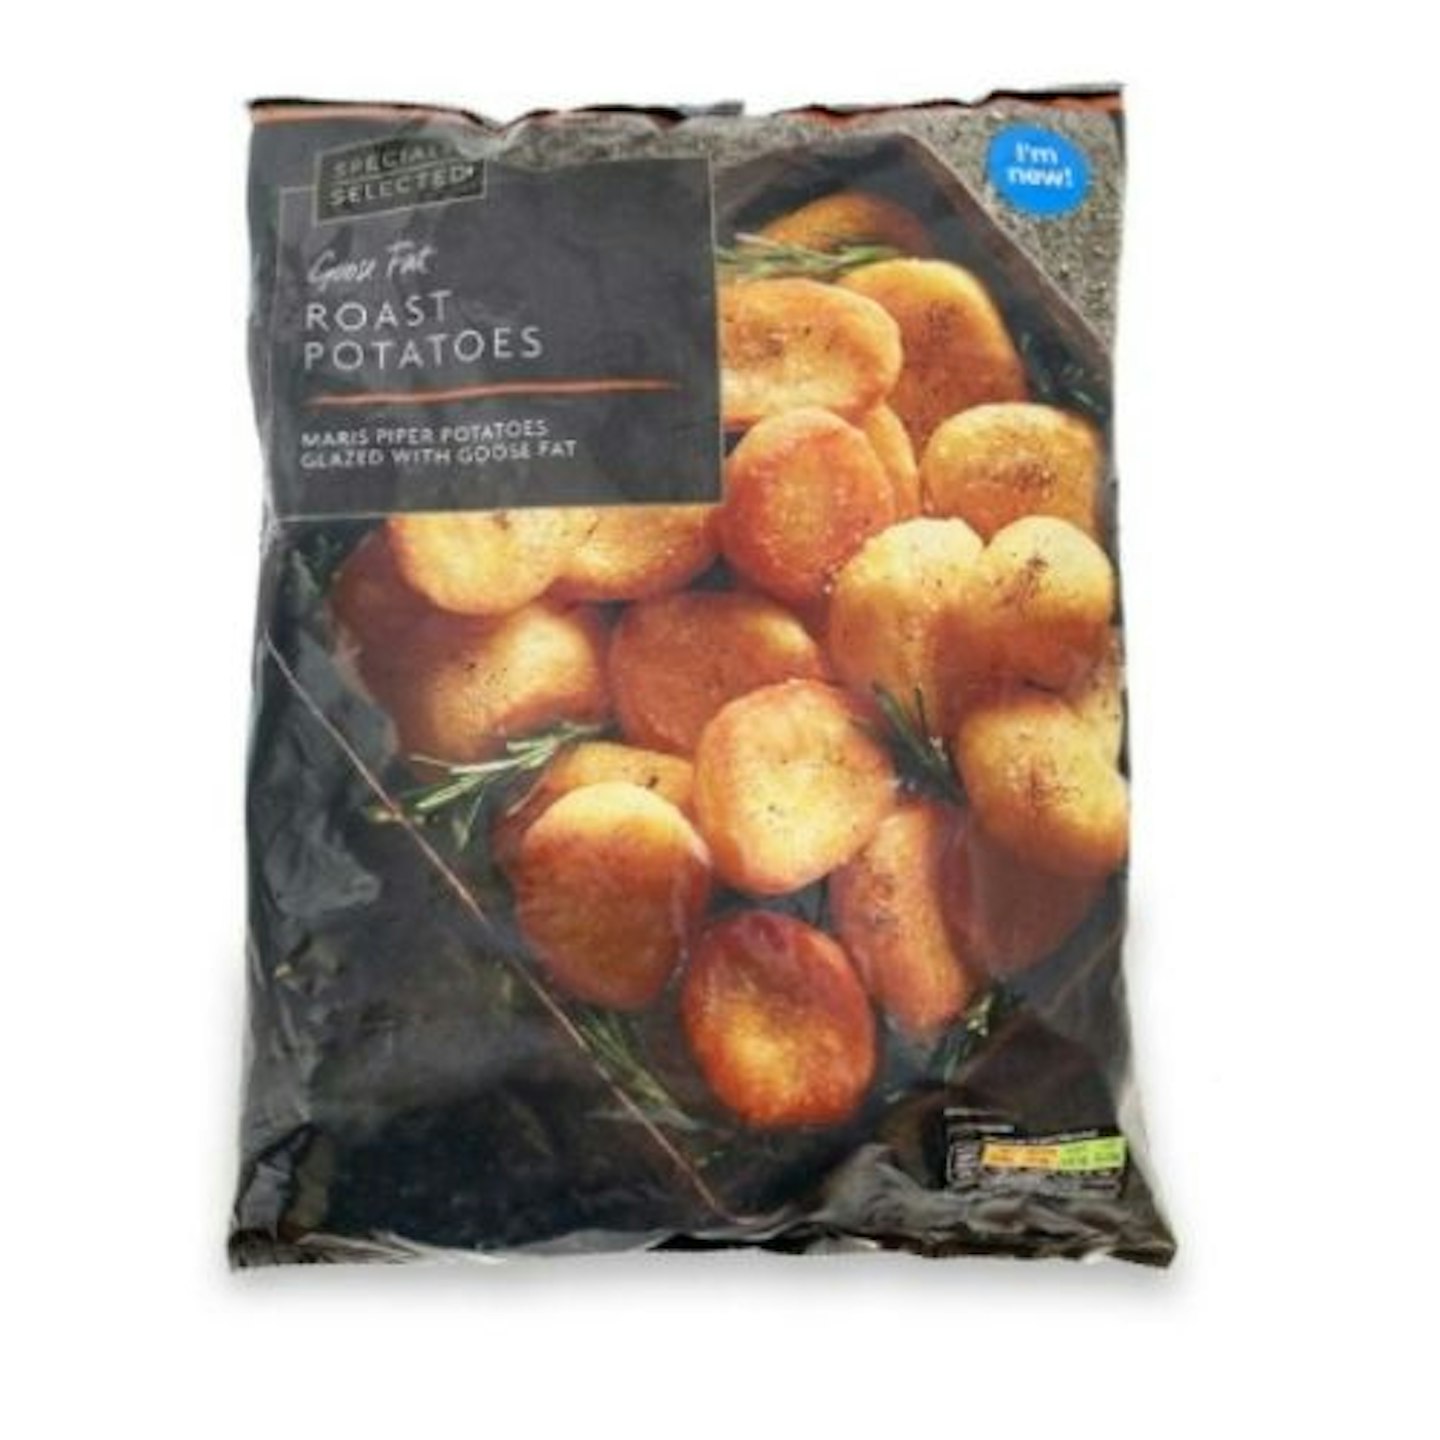 Specially Selected Goose Fat Roast Potatoes